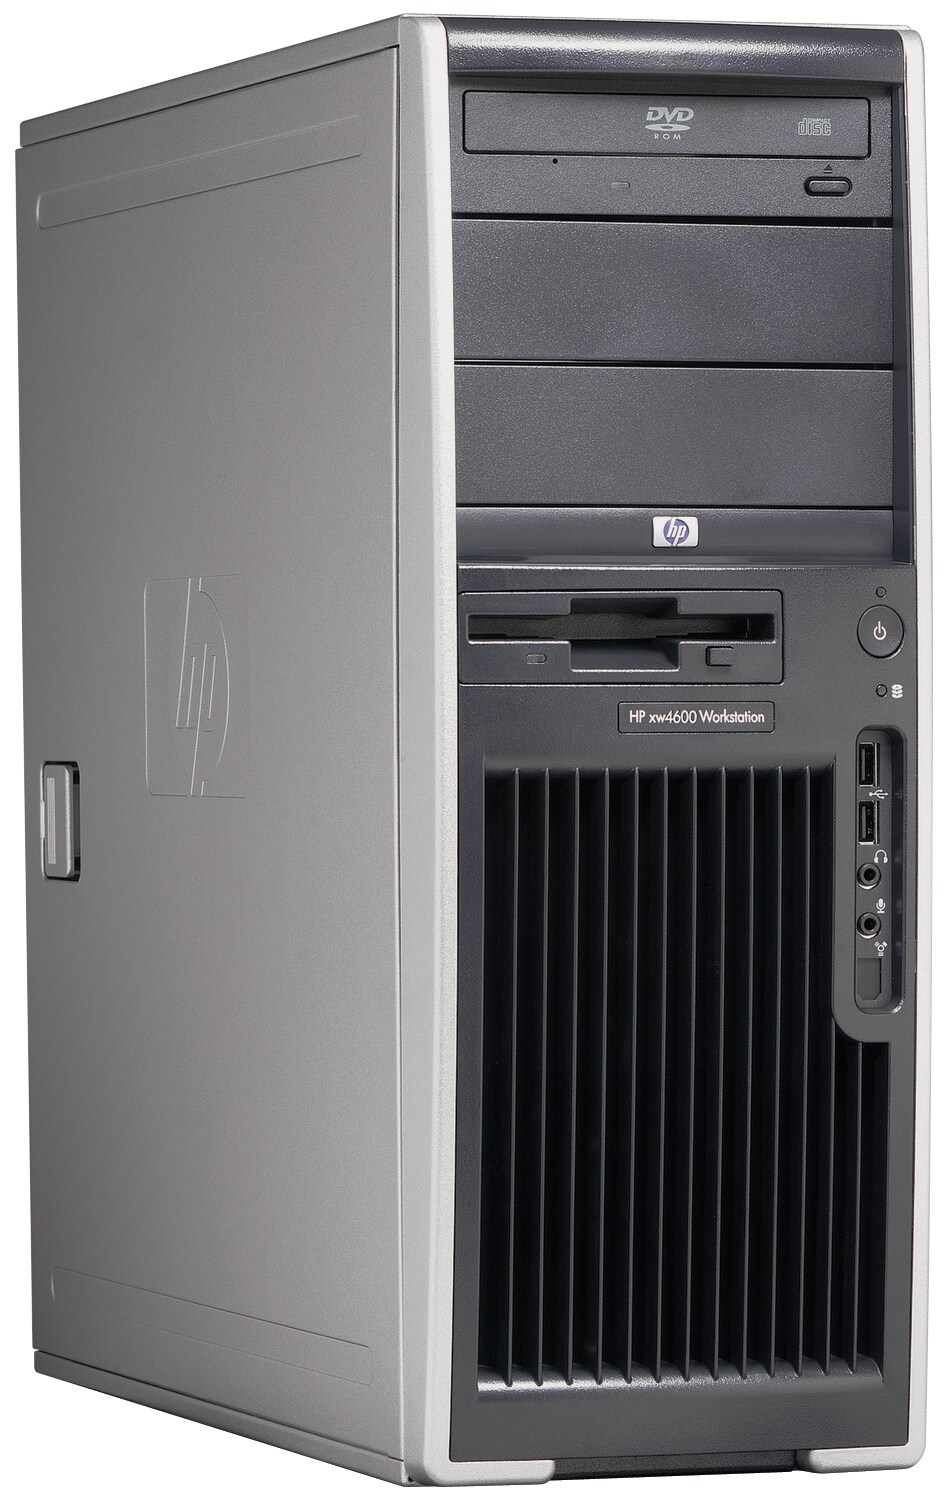 HP Workstation xw4600 - Core 2 Duo E6850 3 GHz